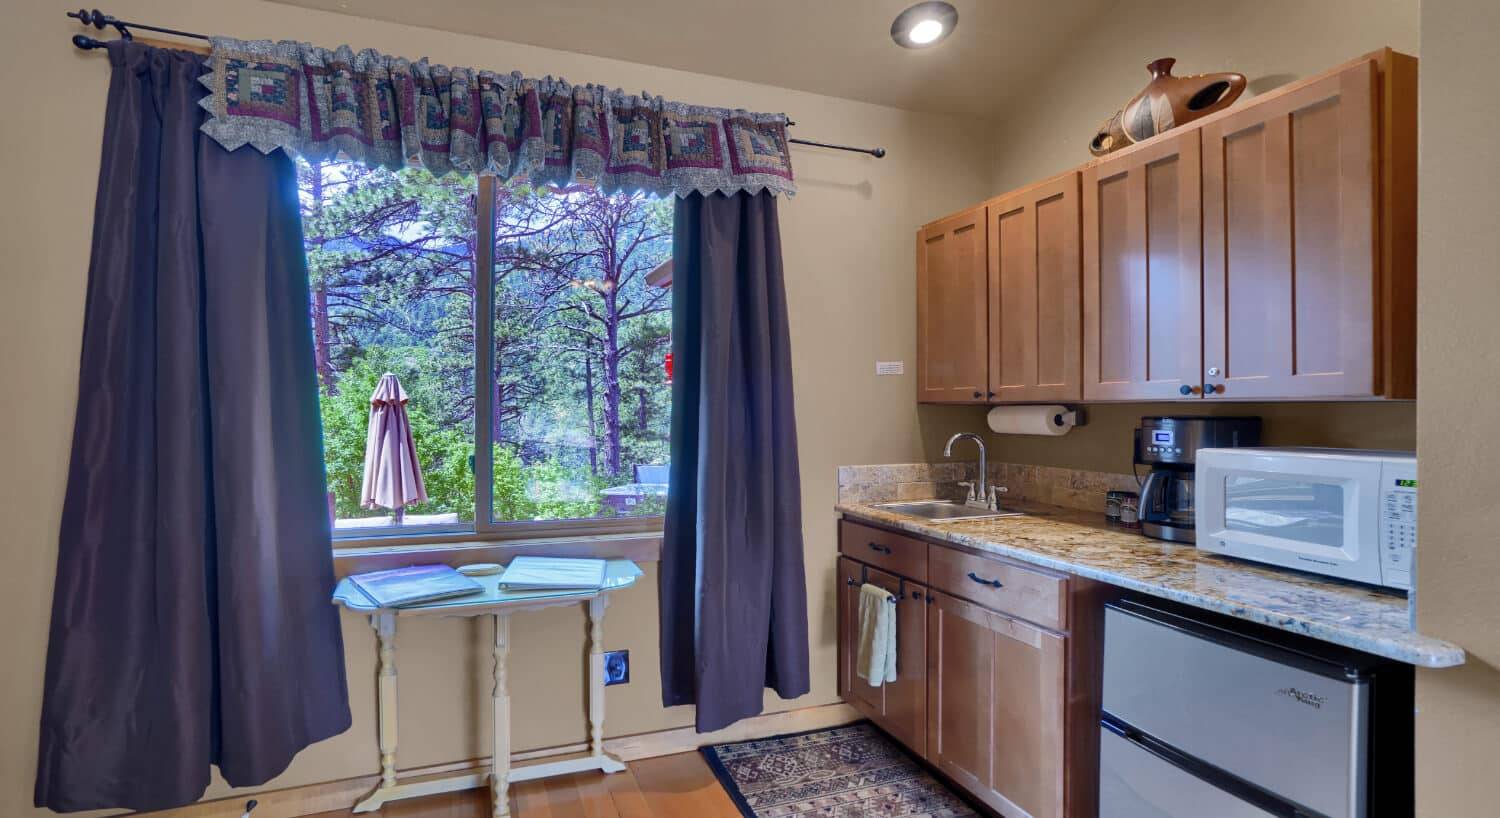 a small kitchen area with mini fridge, microwave, coffeemaker, and large picture window with trees and mountains